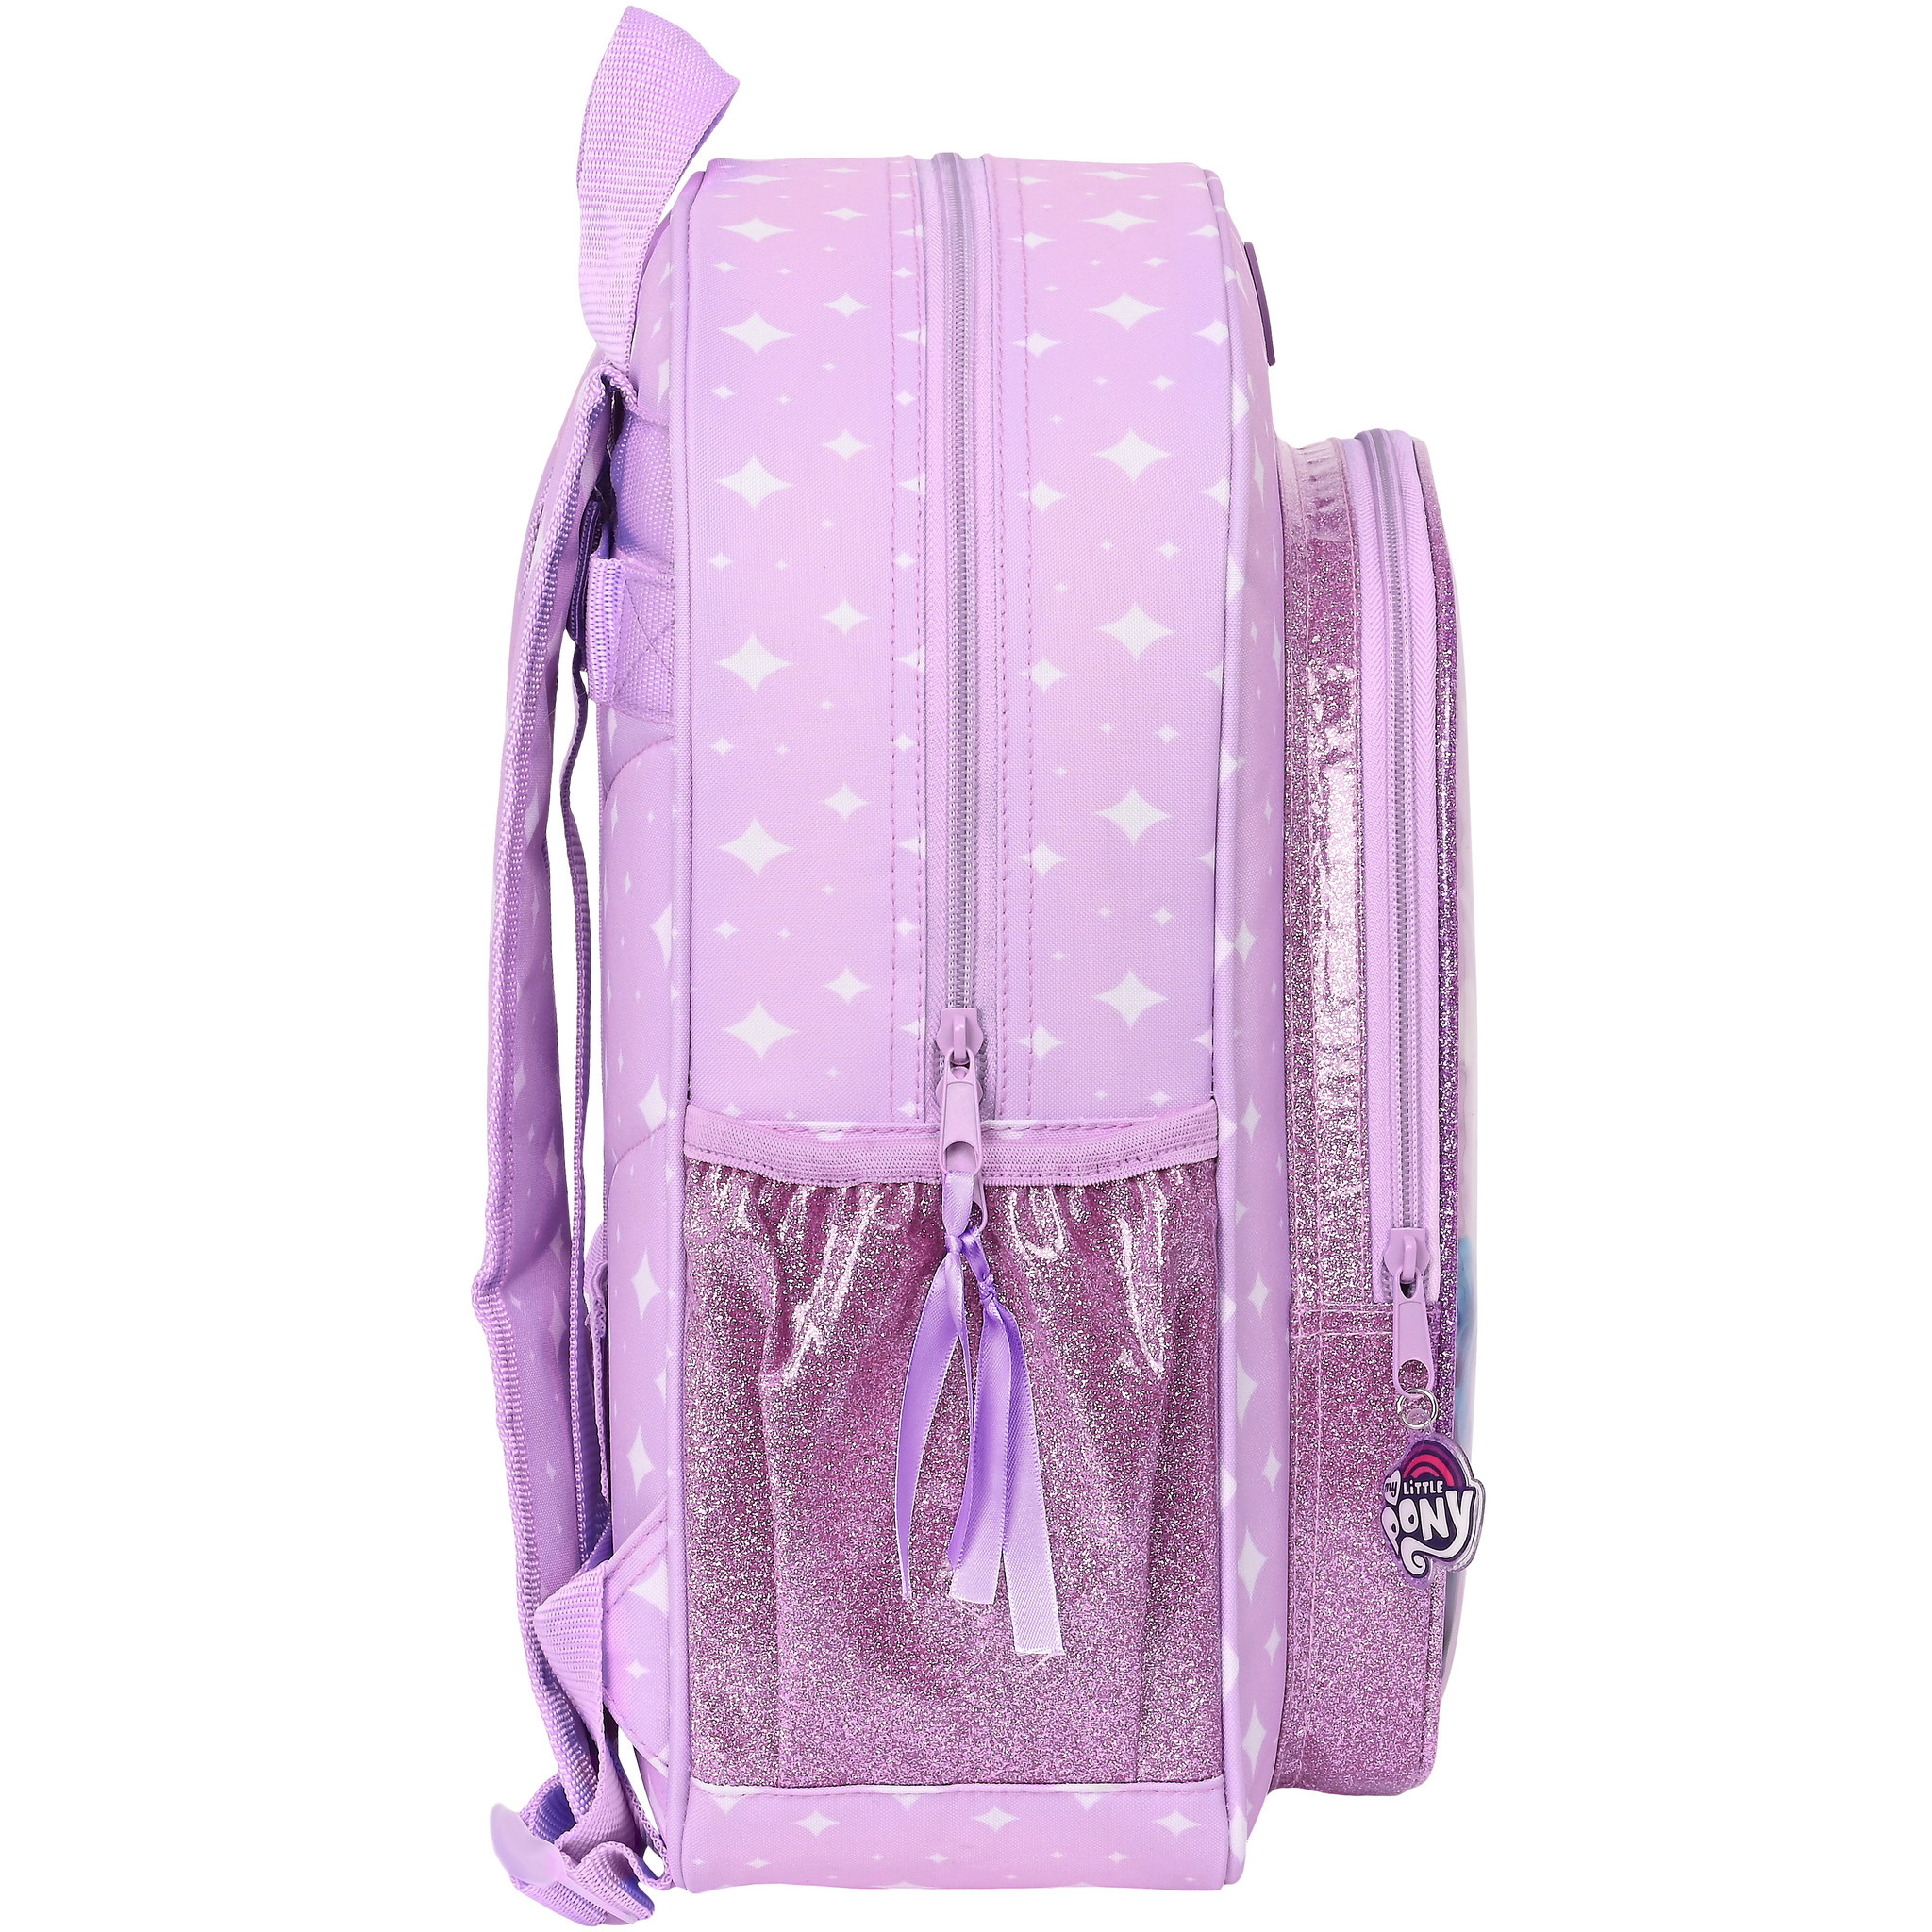 My little Pony Backpack, #love - 38 x 29 x 10 cm - Polyester